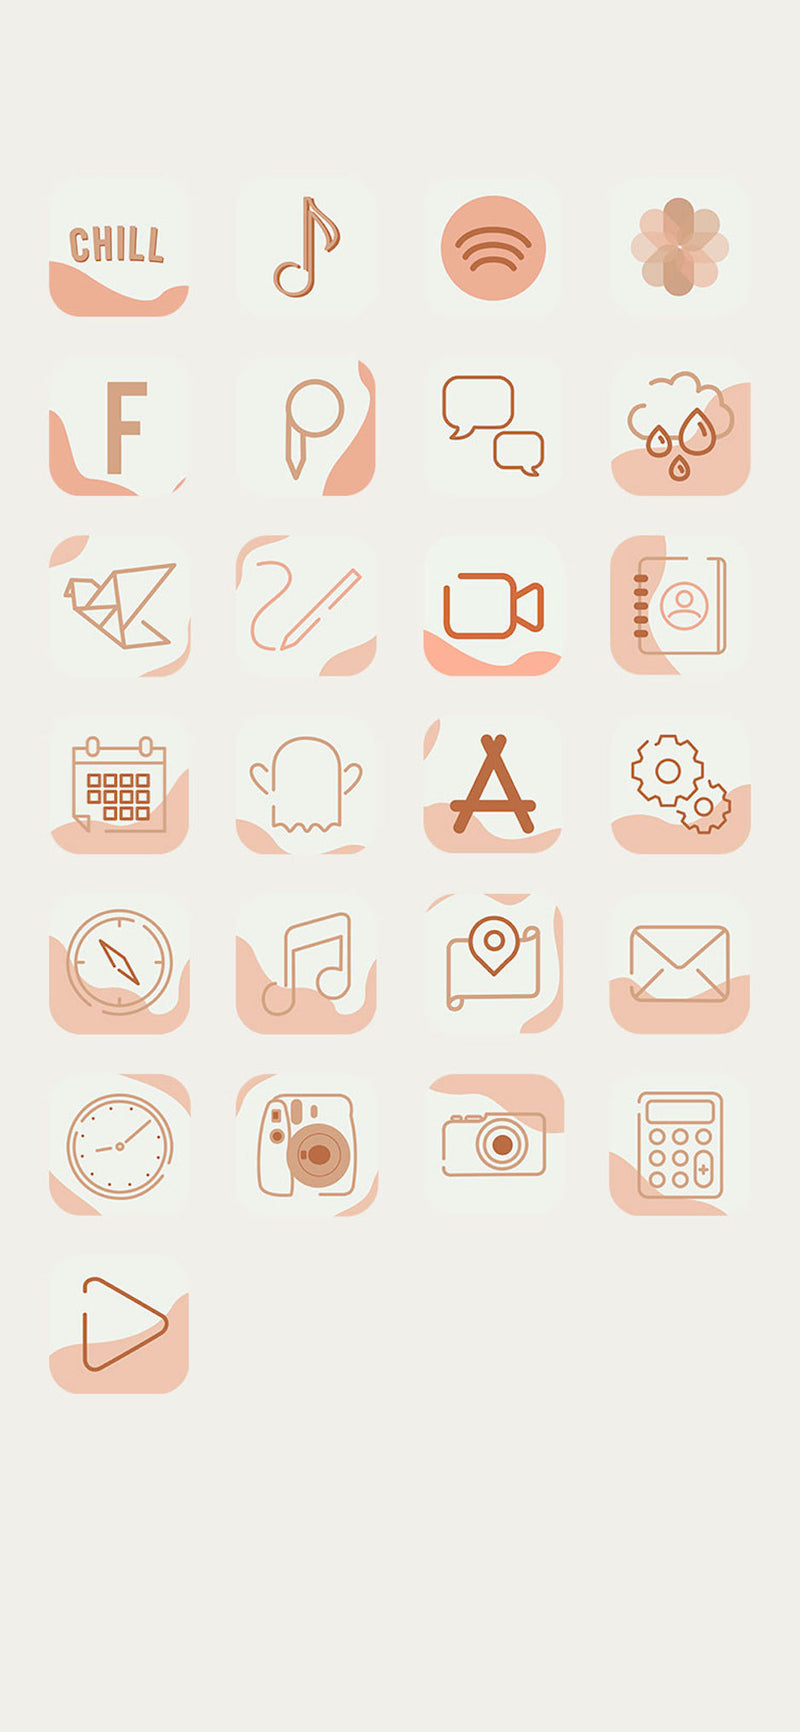 page showing all the peach pink and white colored icons that come in this pack- facebook, netflix, tiktok, spotify, photos, pinterest, messenger, weather, twitter, notes, video camera, contacts, calendar, snap chat, app store, settings, compass, music, maps, email, click, instagram, camera, youtube, calculator